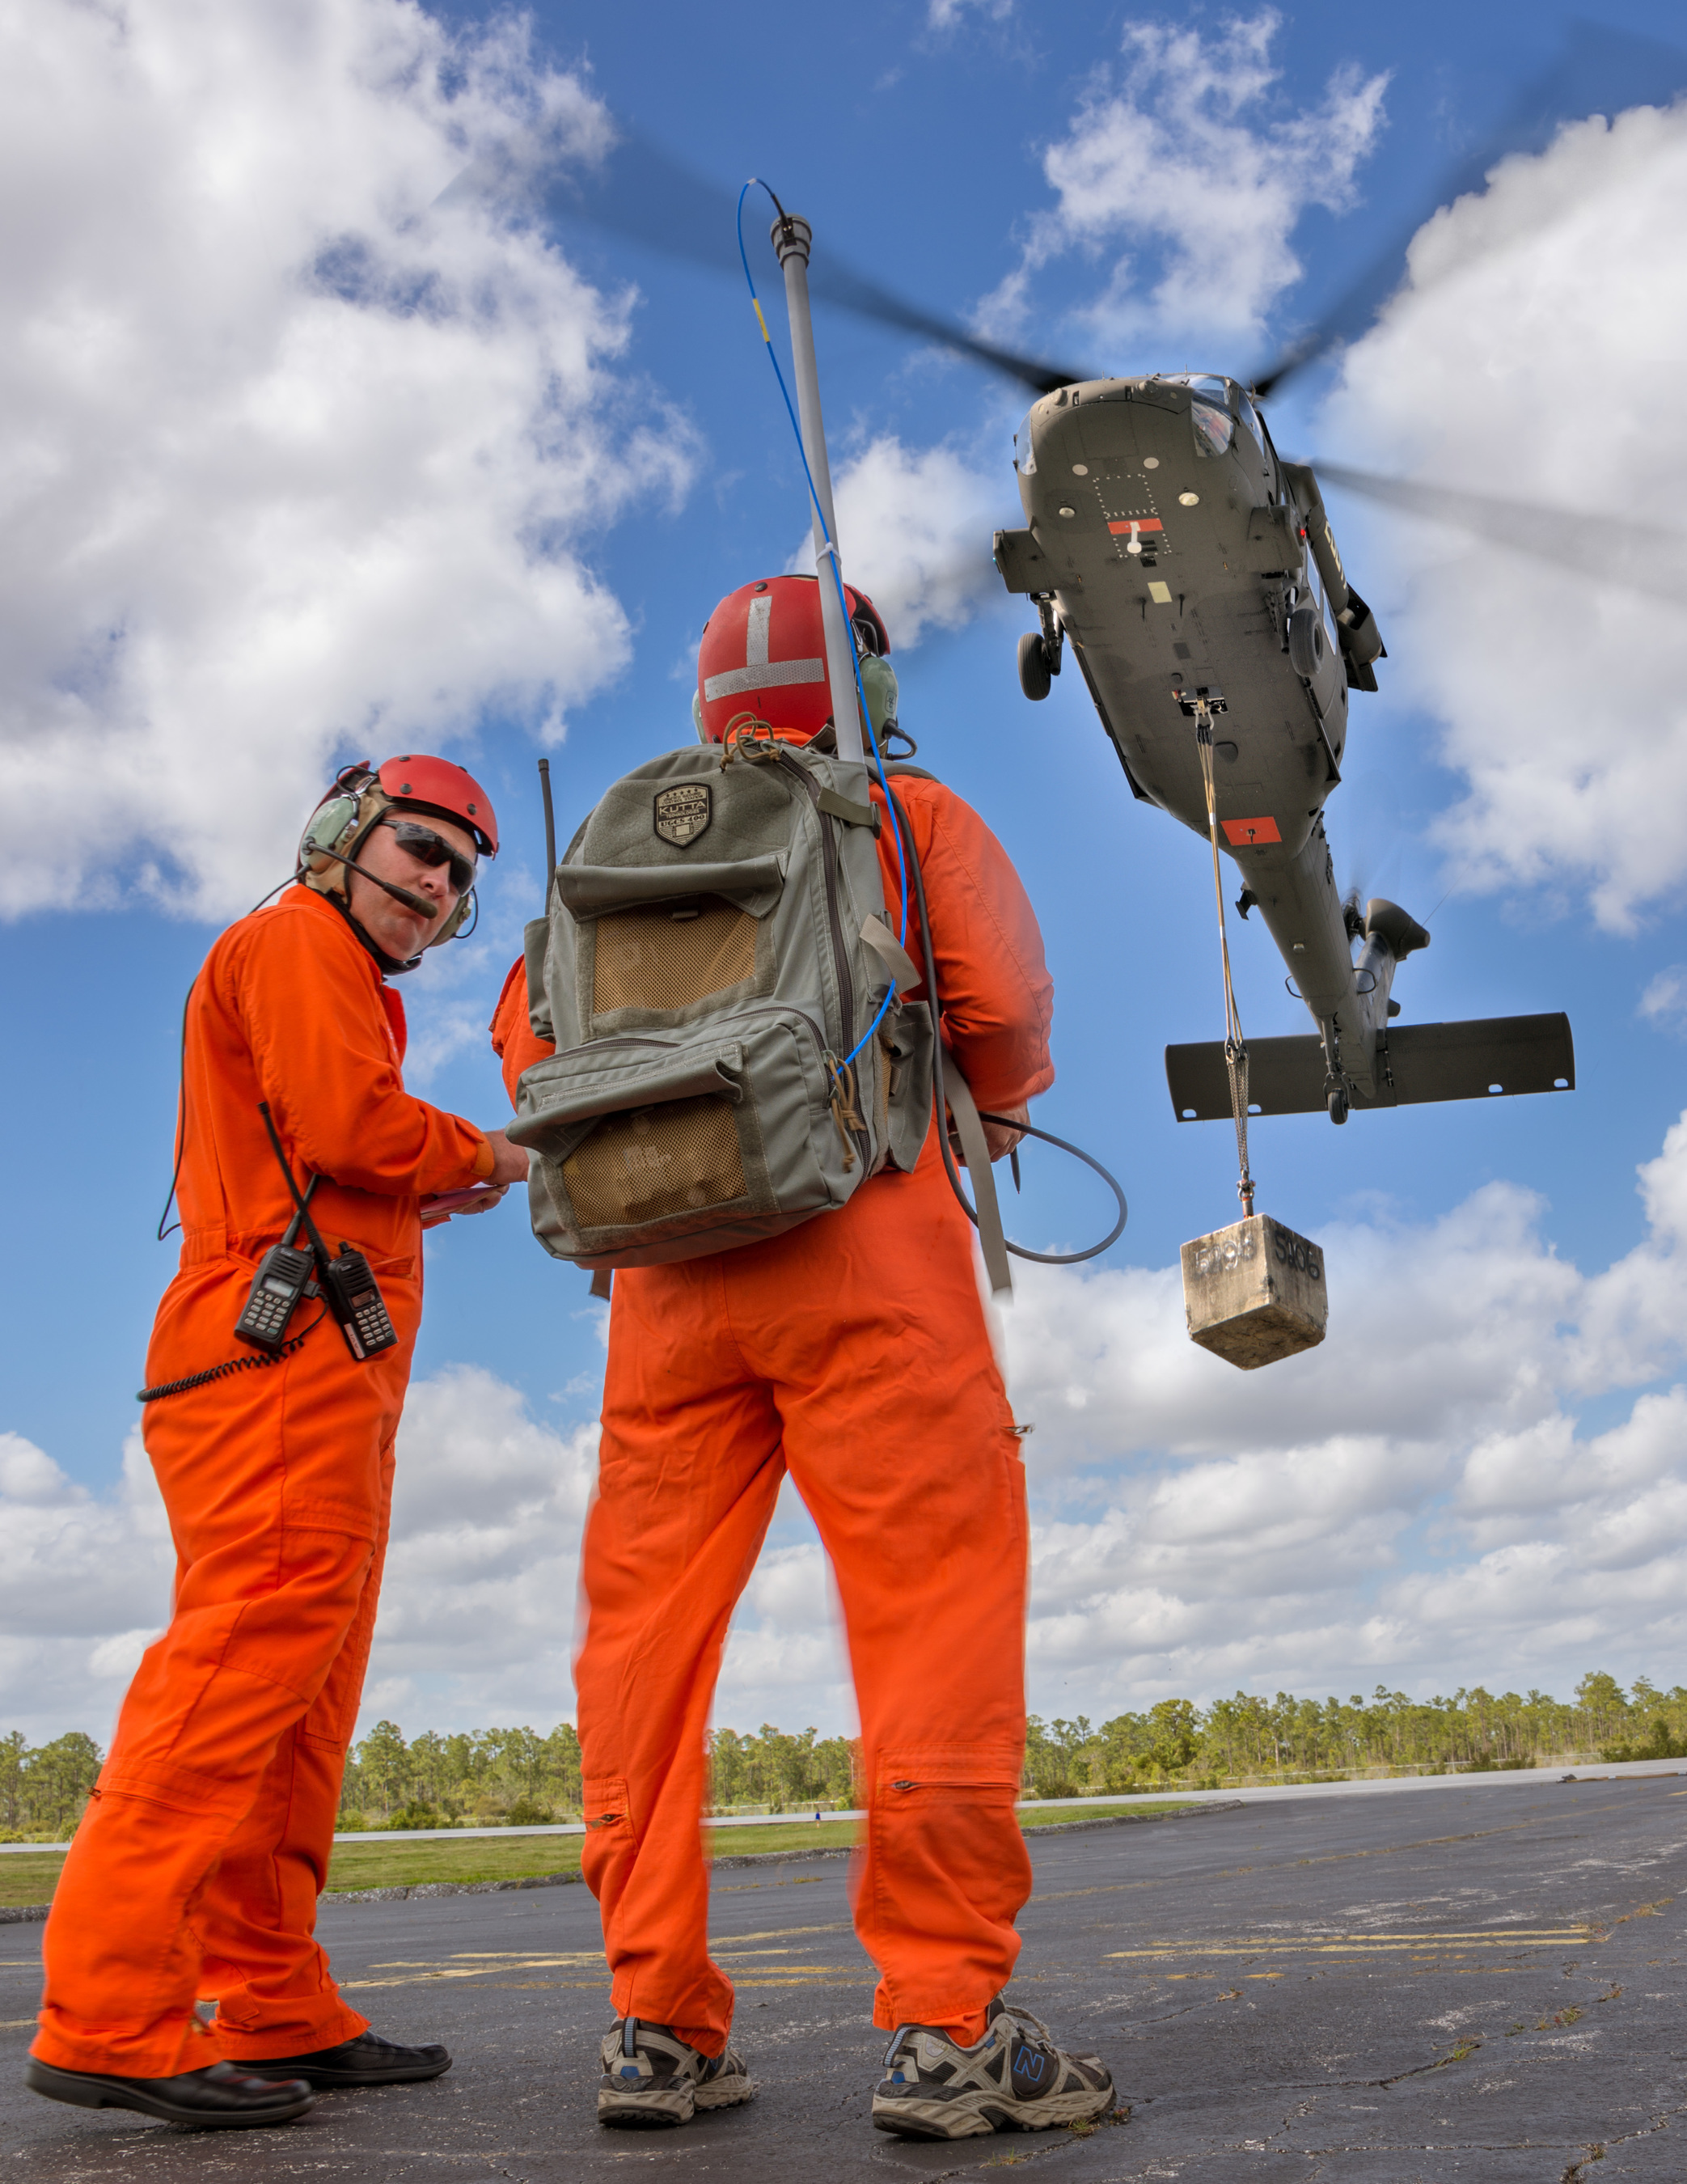 In cooperation with the U.S. Army, Sikorsky Aircraft Corp. has successfully demonstrated optionally piloted flight of a Black Hawk helicopter, a significant step toward providing autonomous cargo delivery functionality to the U.S. Army.  (PRNewsFoto/Sikorsky Aircraft Corporation)